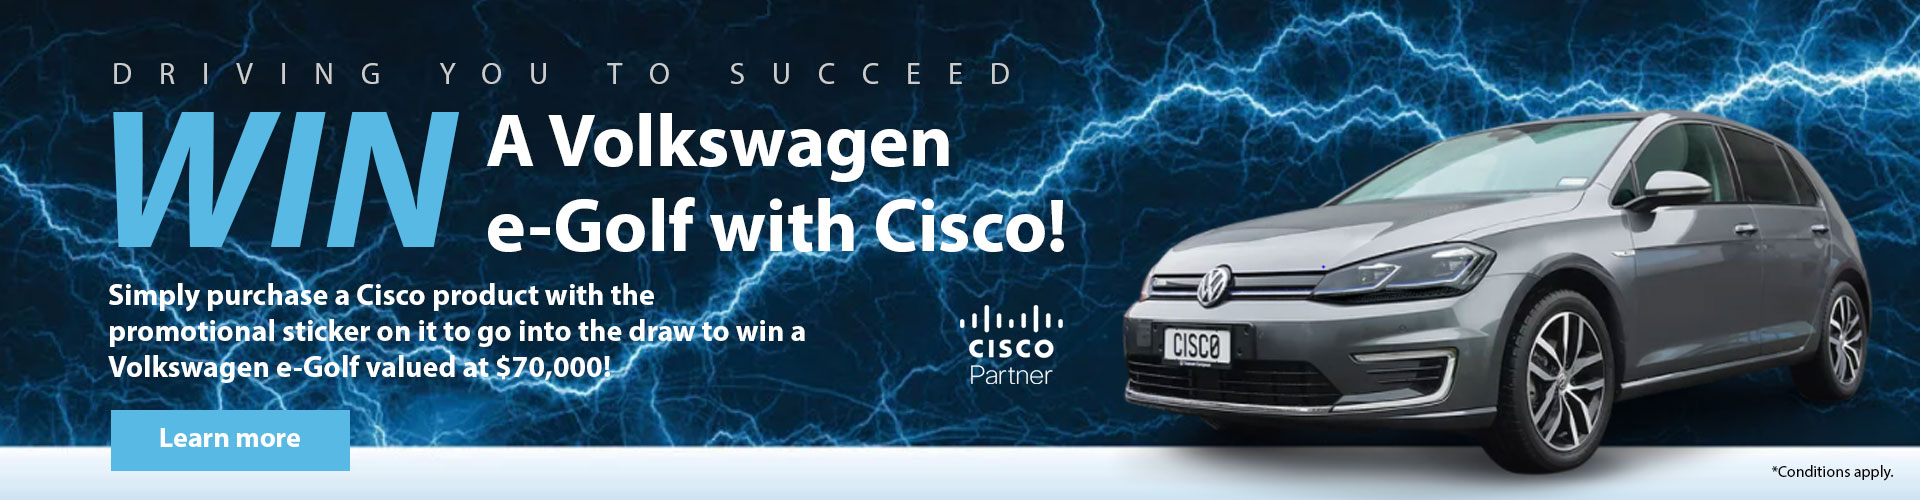 win with Cisco